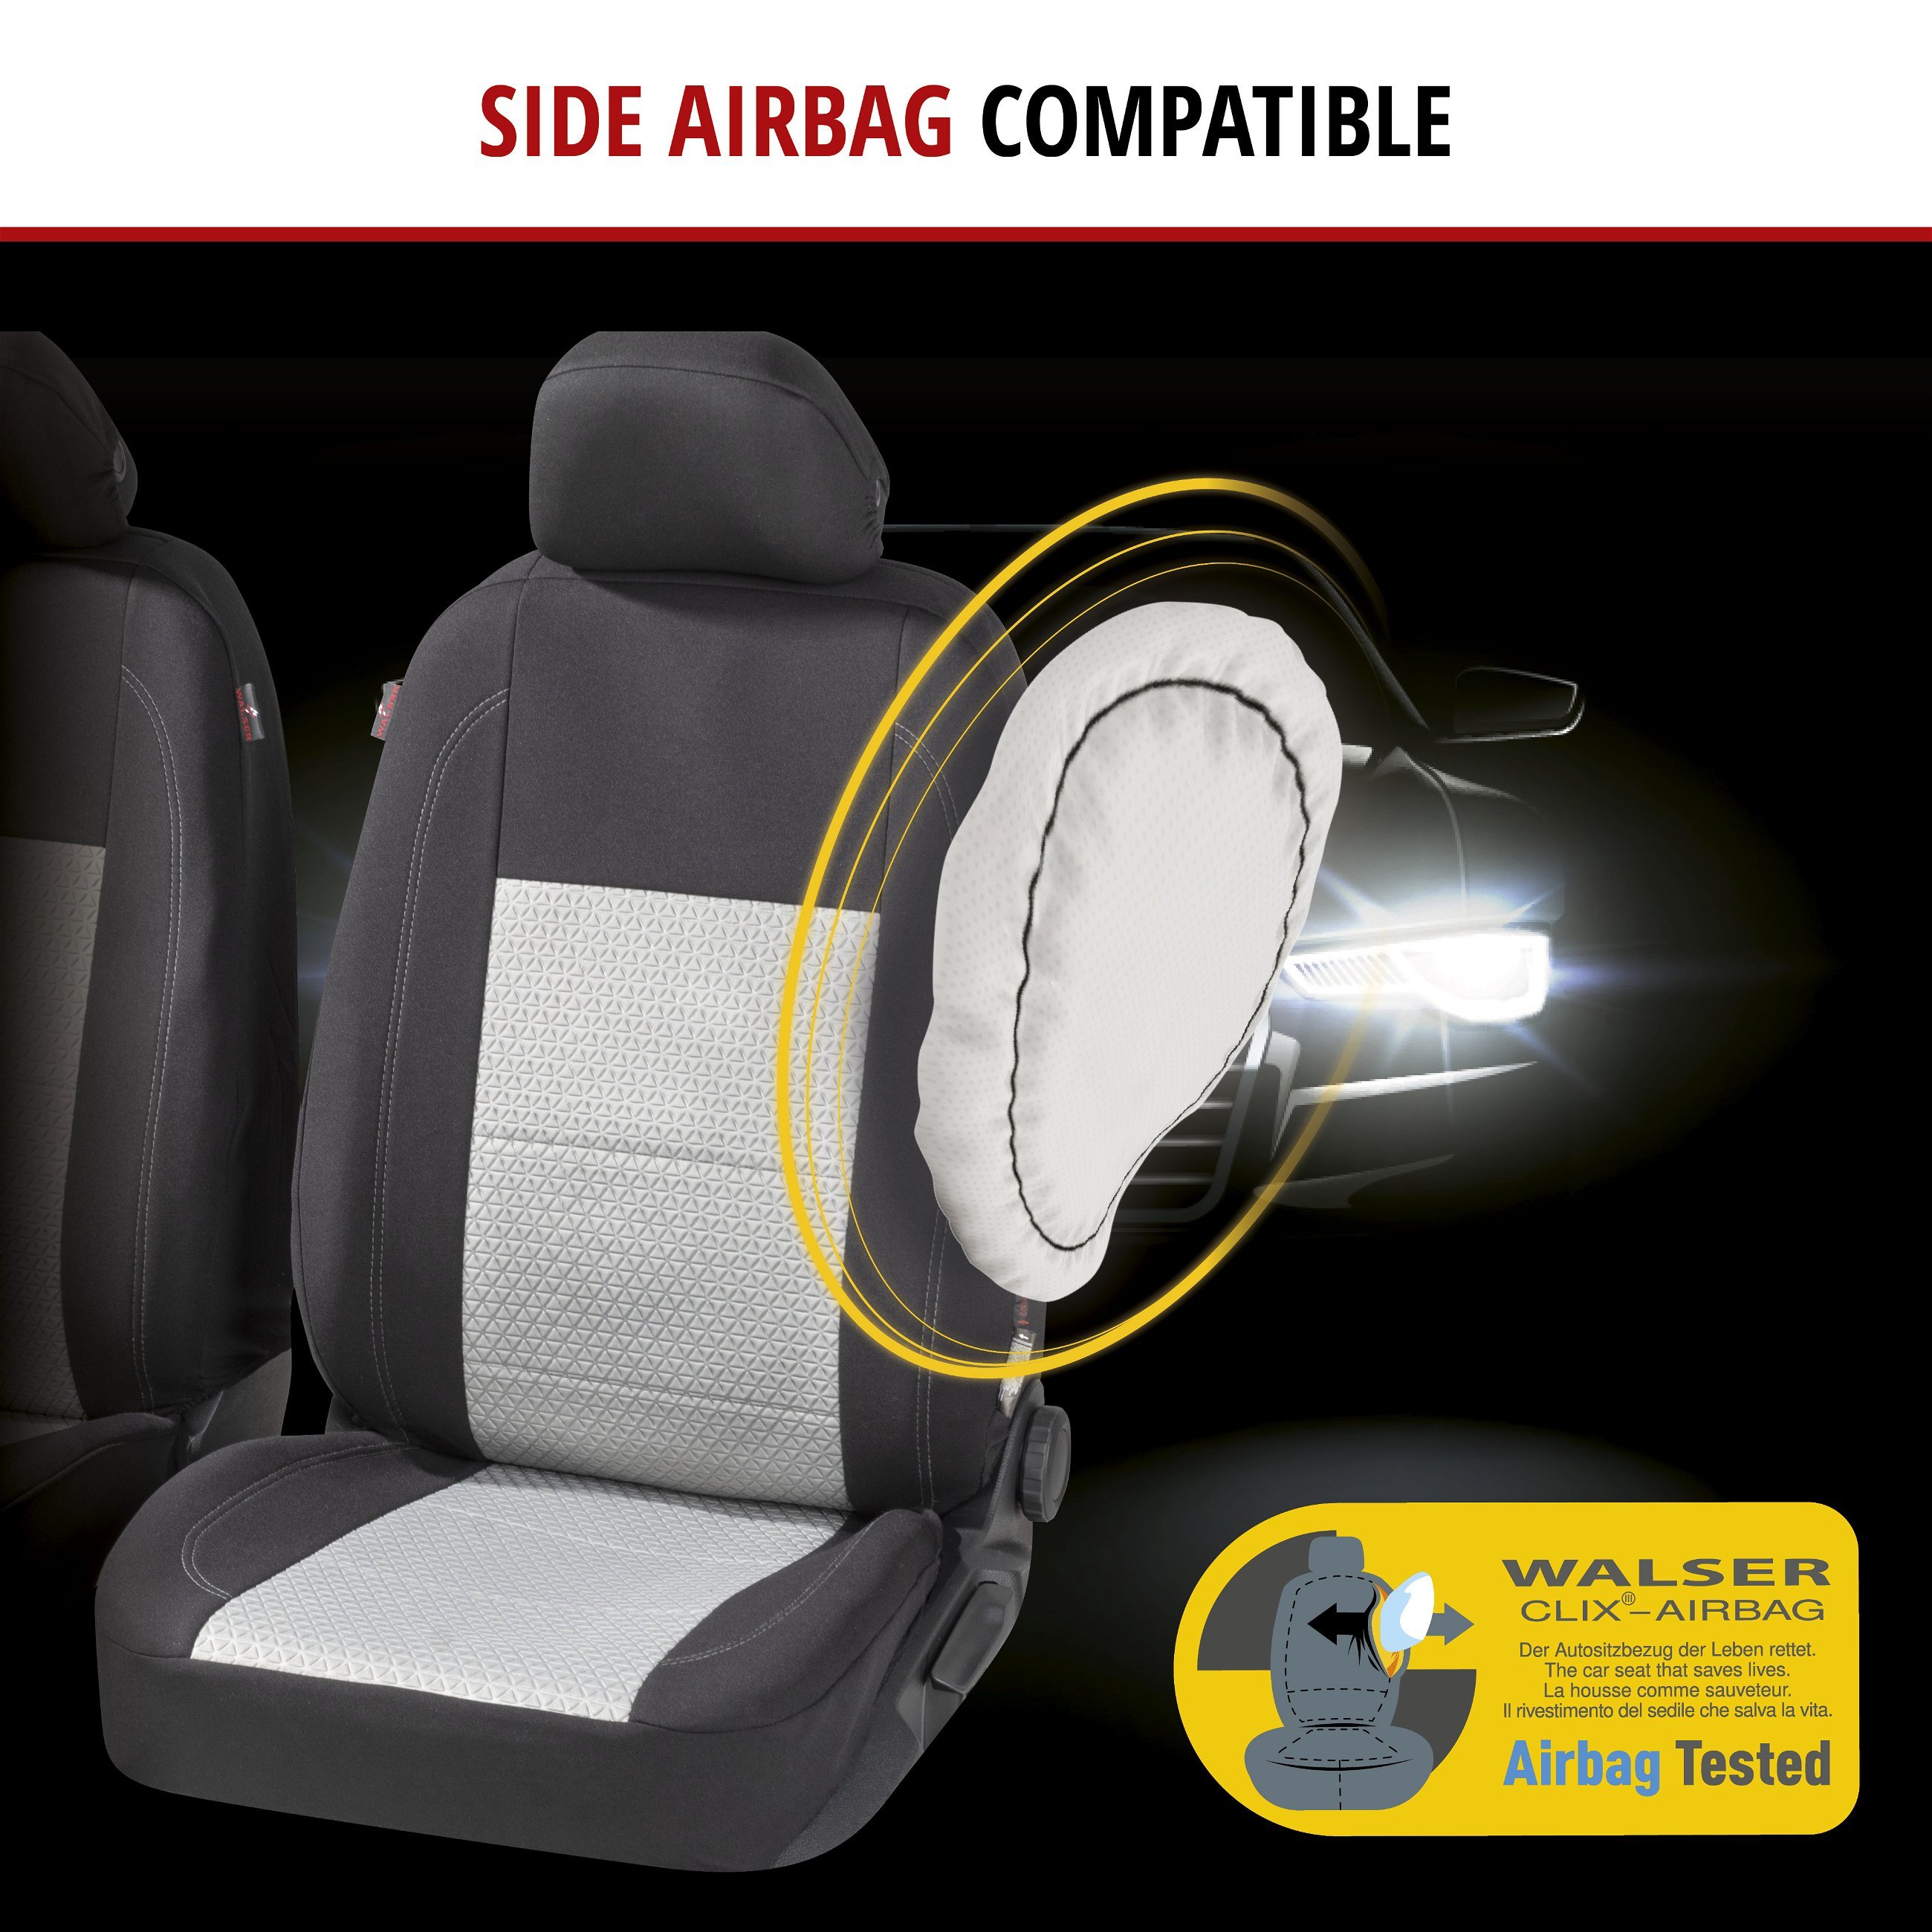 black/silver Seat Walser | covers zip-system covers complete IT Cushions Premium Online set with Seat covers Car seat Avignon Cloth & | ZIPP | covers | Car Shop Seat